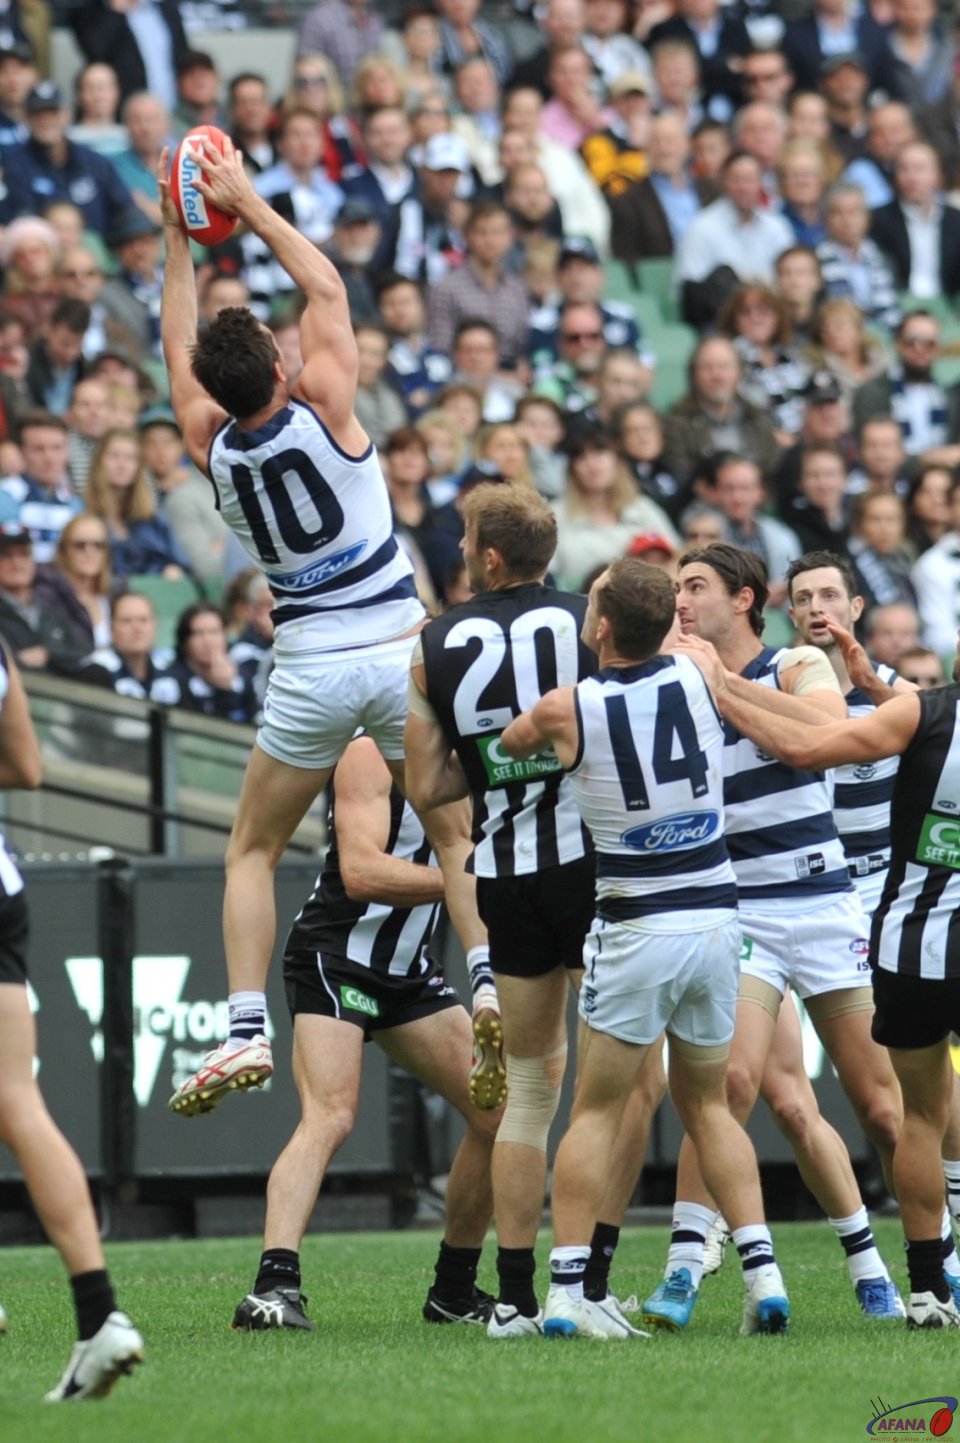 Daniel Menzel takes the mark inside 50 as Selwood (14) and Reid (20) look on